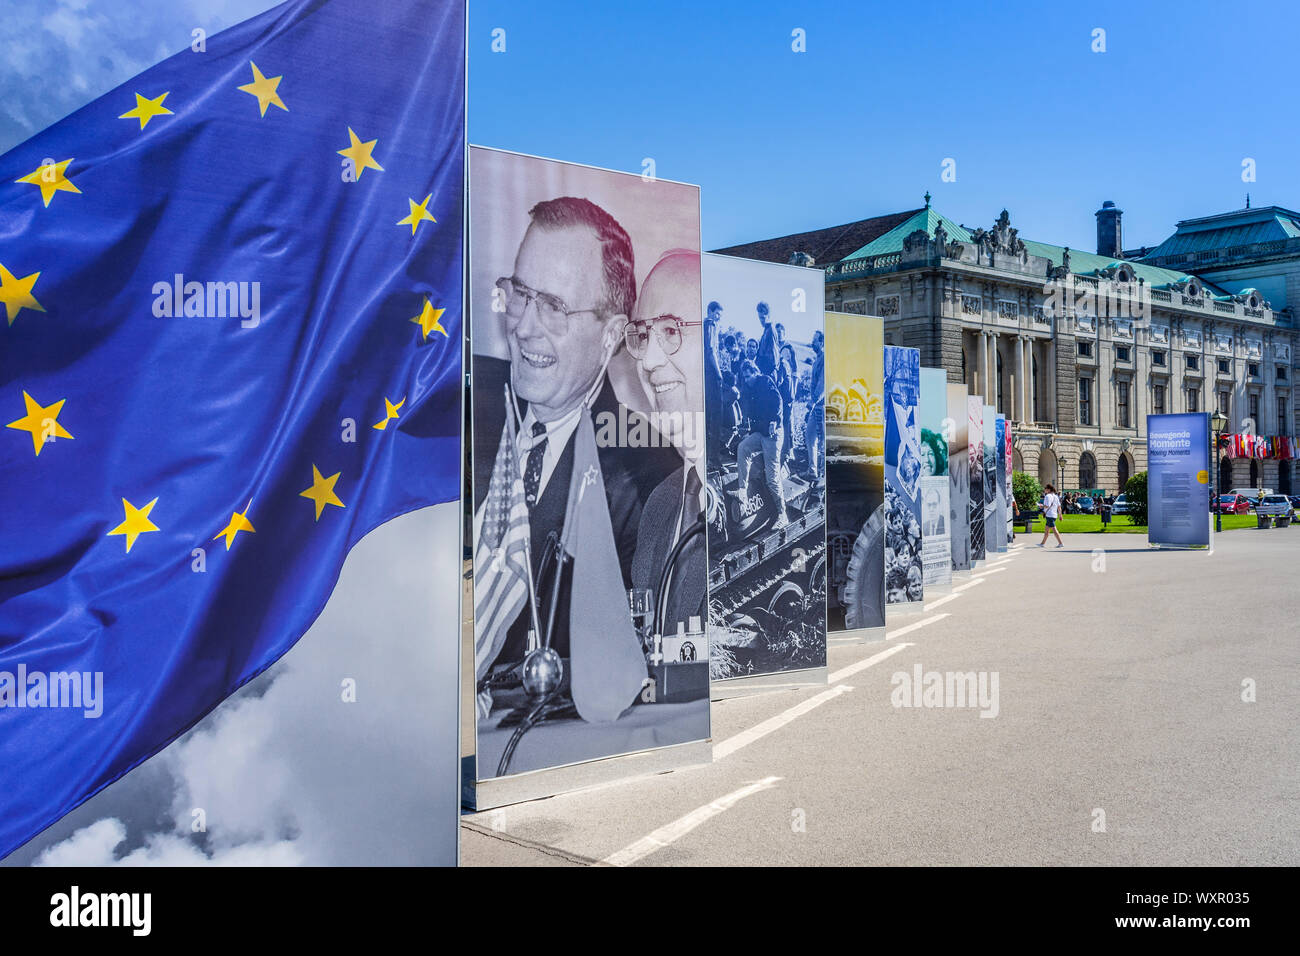 'Moving Moments' photo display celebrating 'The end of a divided Europe' in the Heidenplatz, Vienna, Austria. Stock Photo